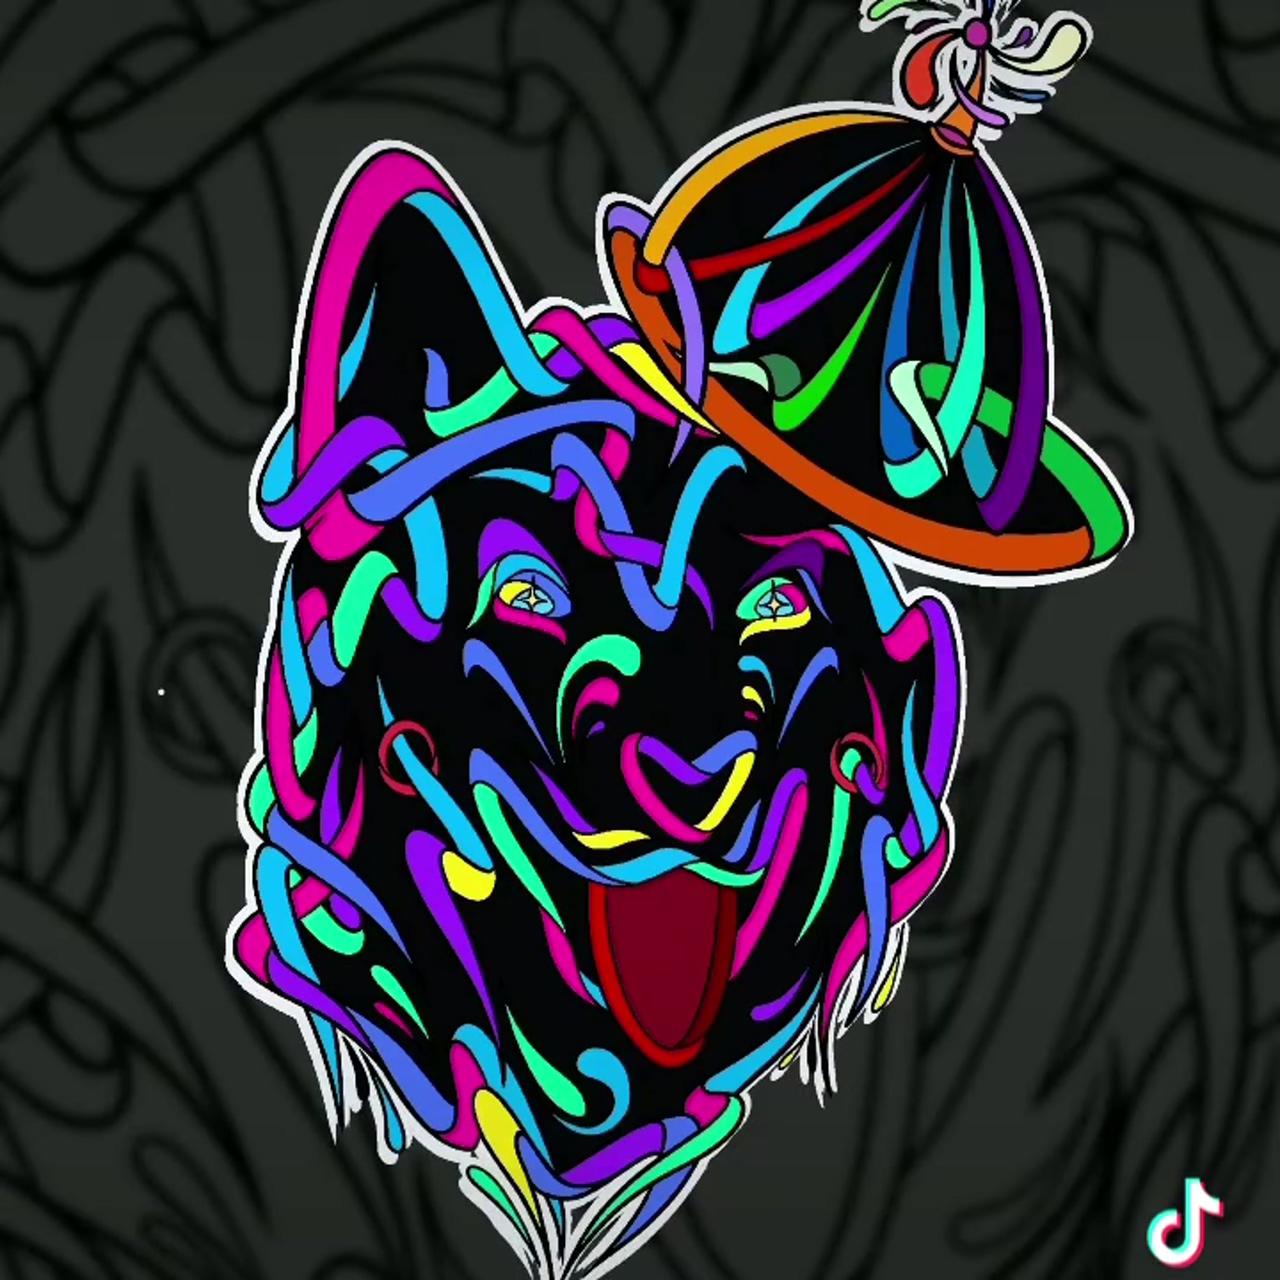 Abstract dog art illustration shoker style; abstract board mourning style design